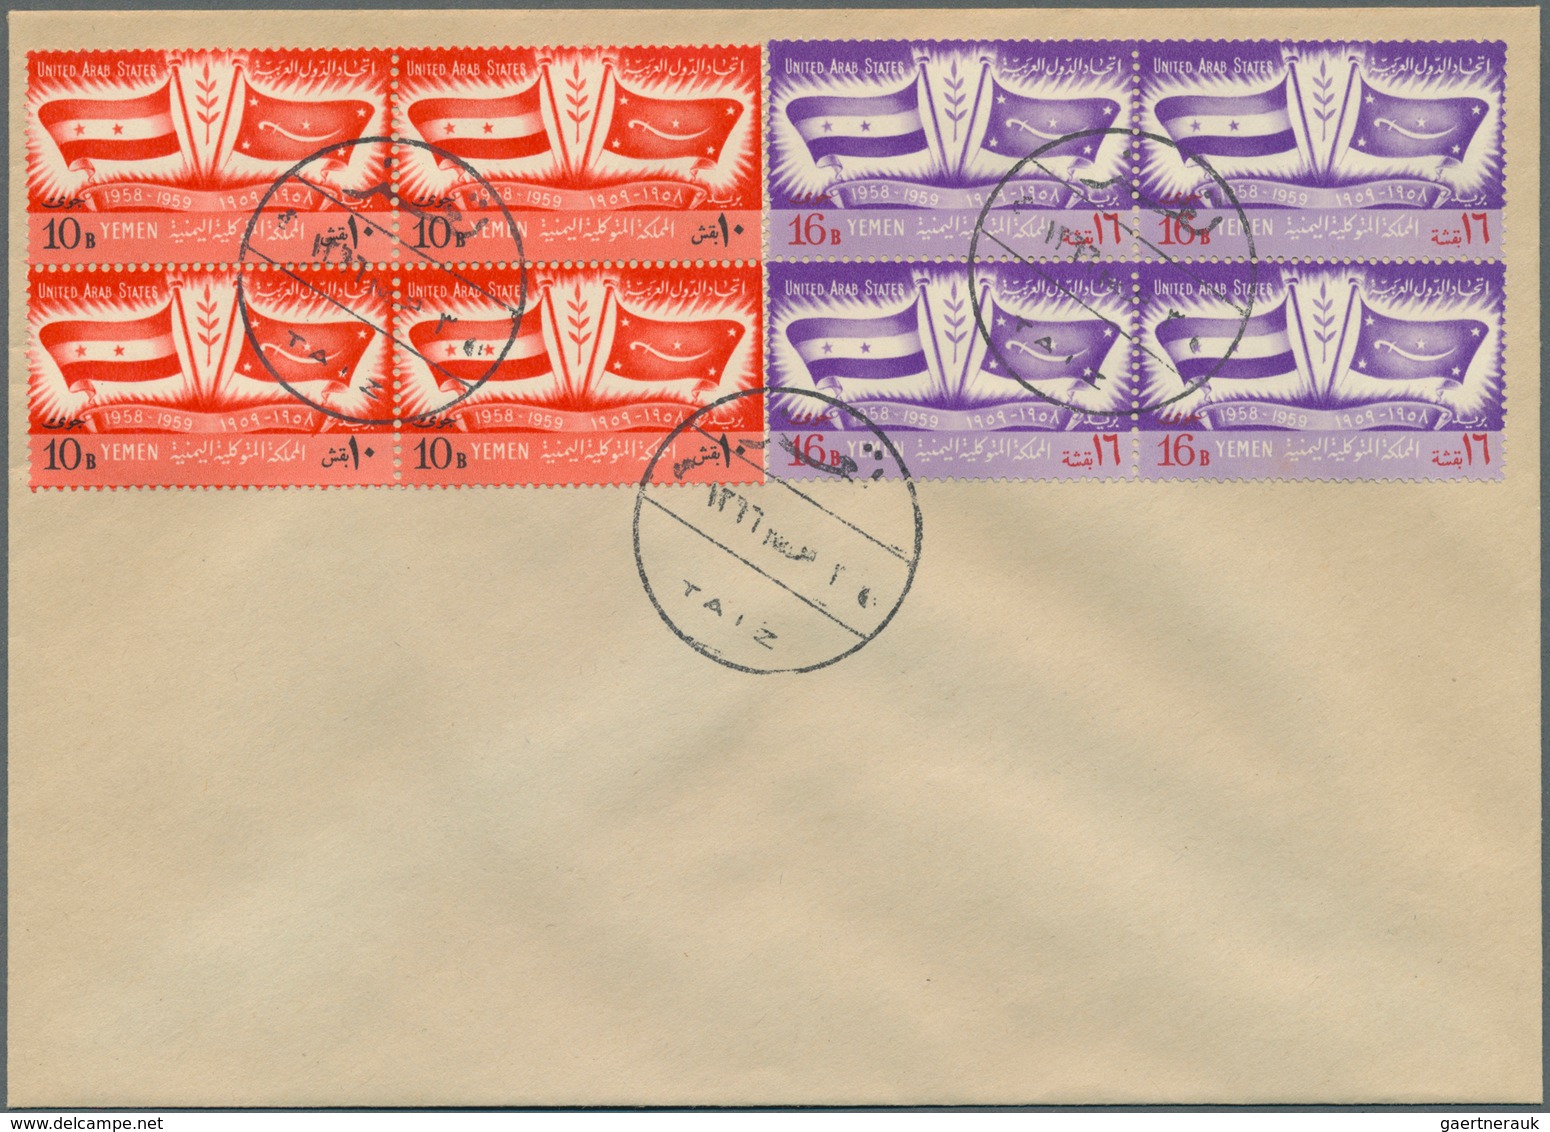 24662 Asien: 1958/1972, ARAB STATES, group of 14 covers (mainly unaddressed envelopes) comprising Yemen, R